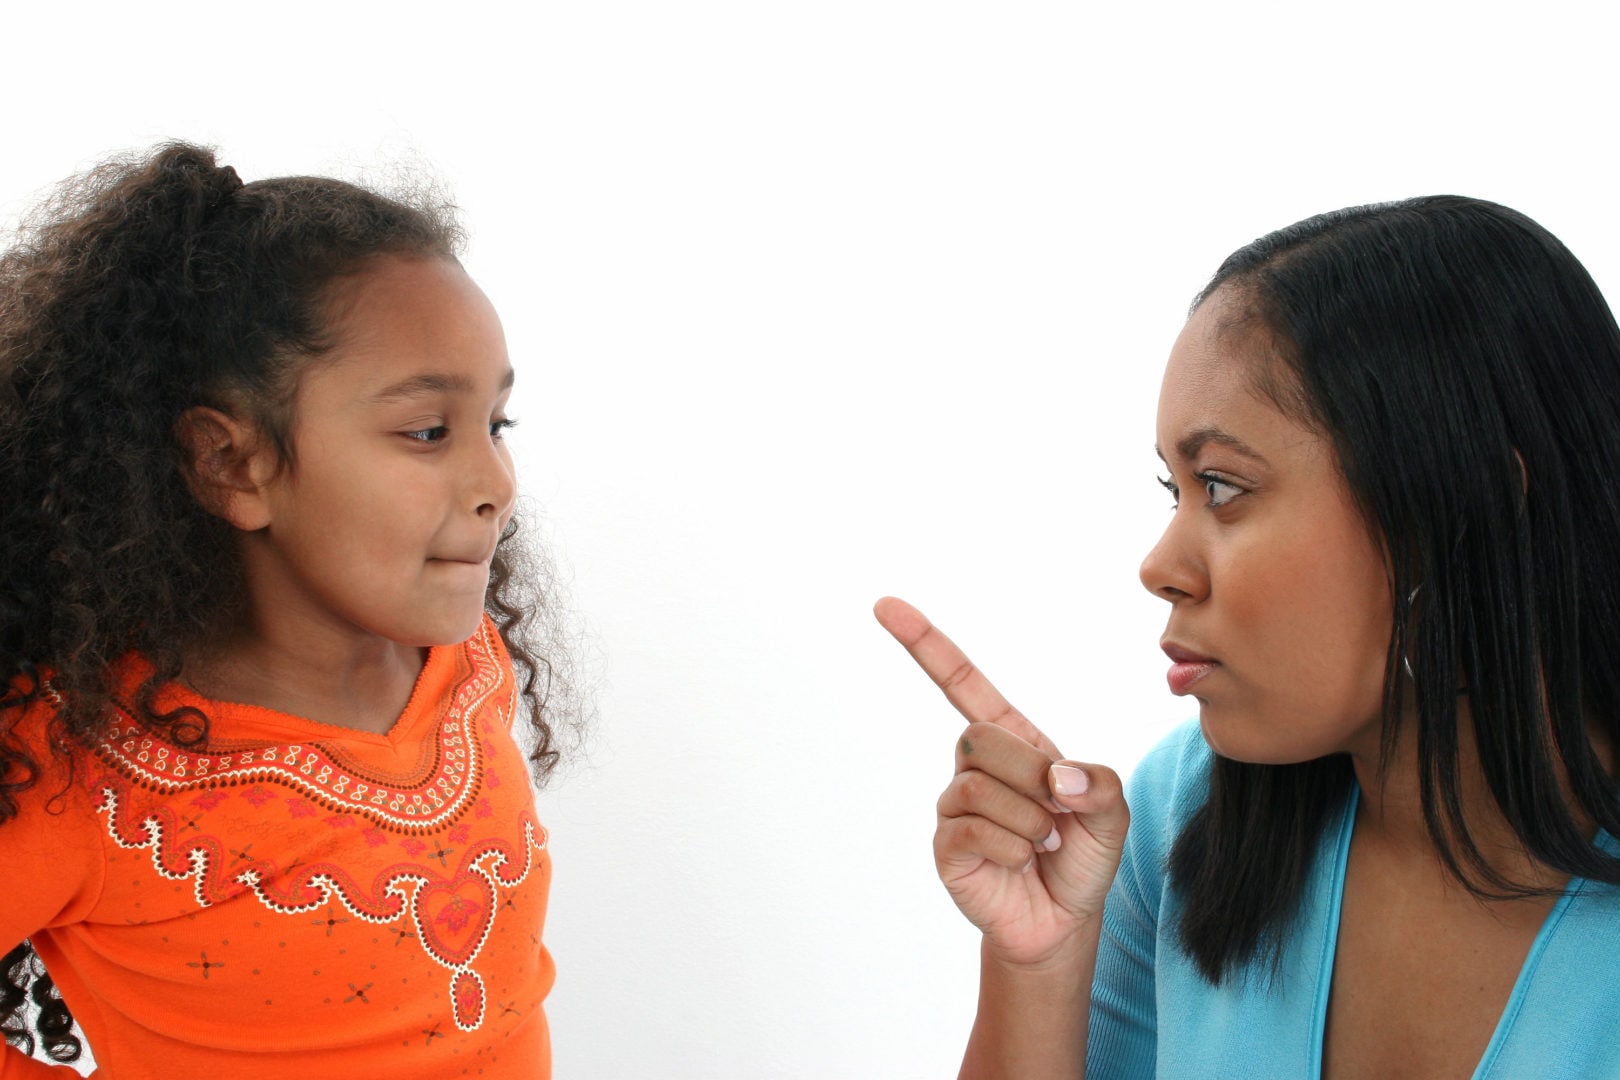 Are You A Strict Parent?